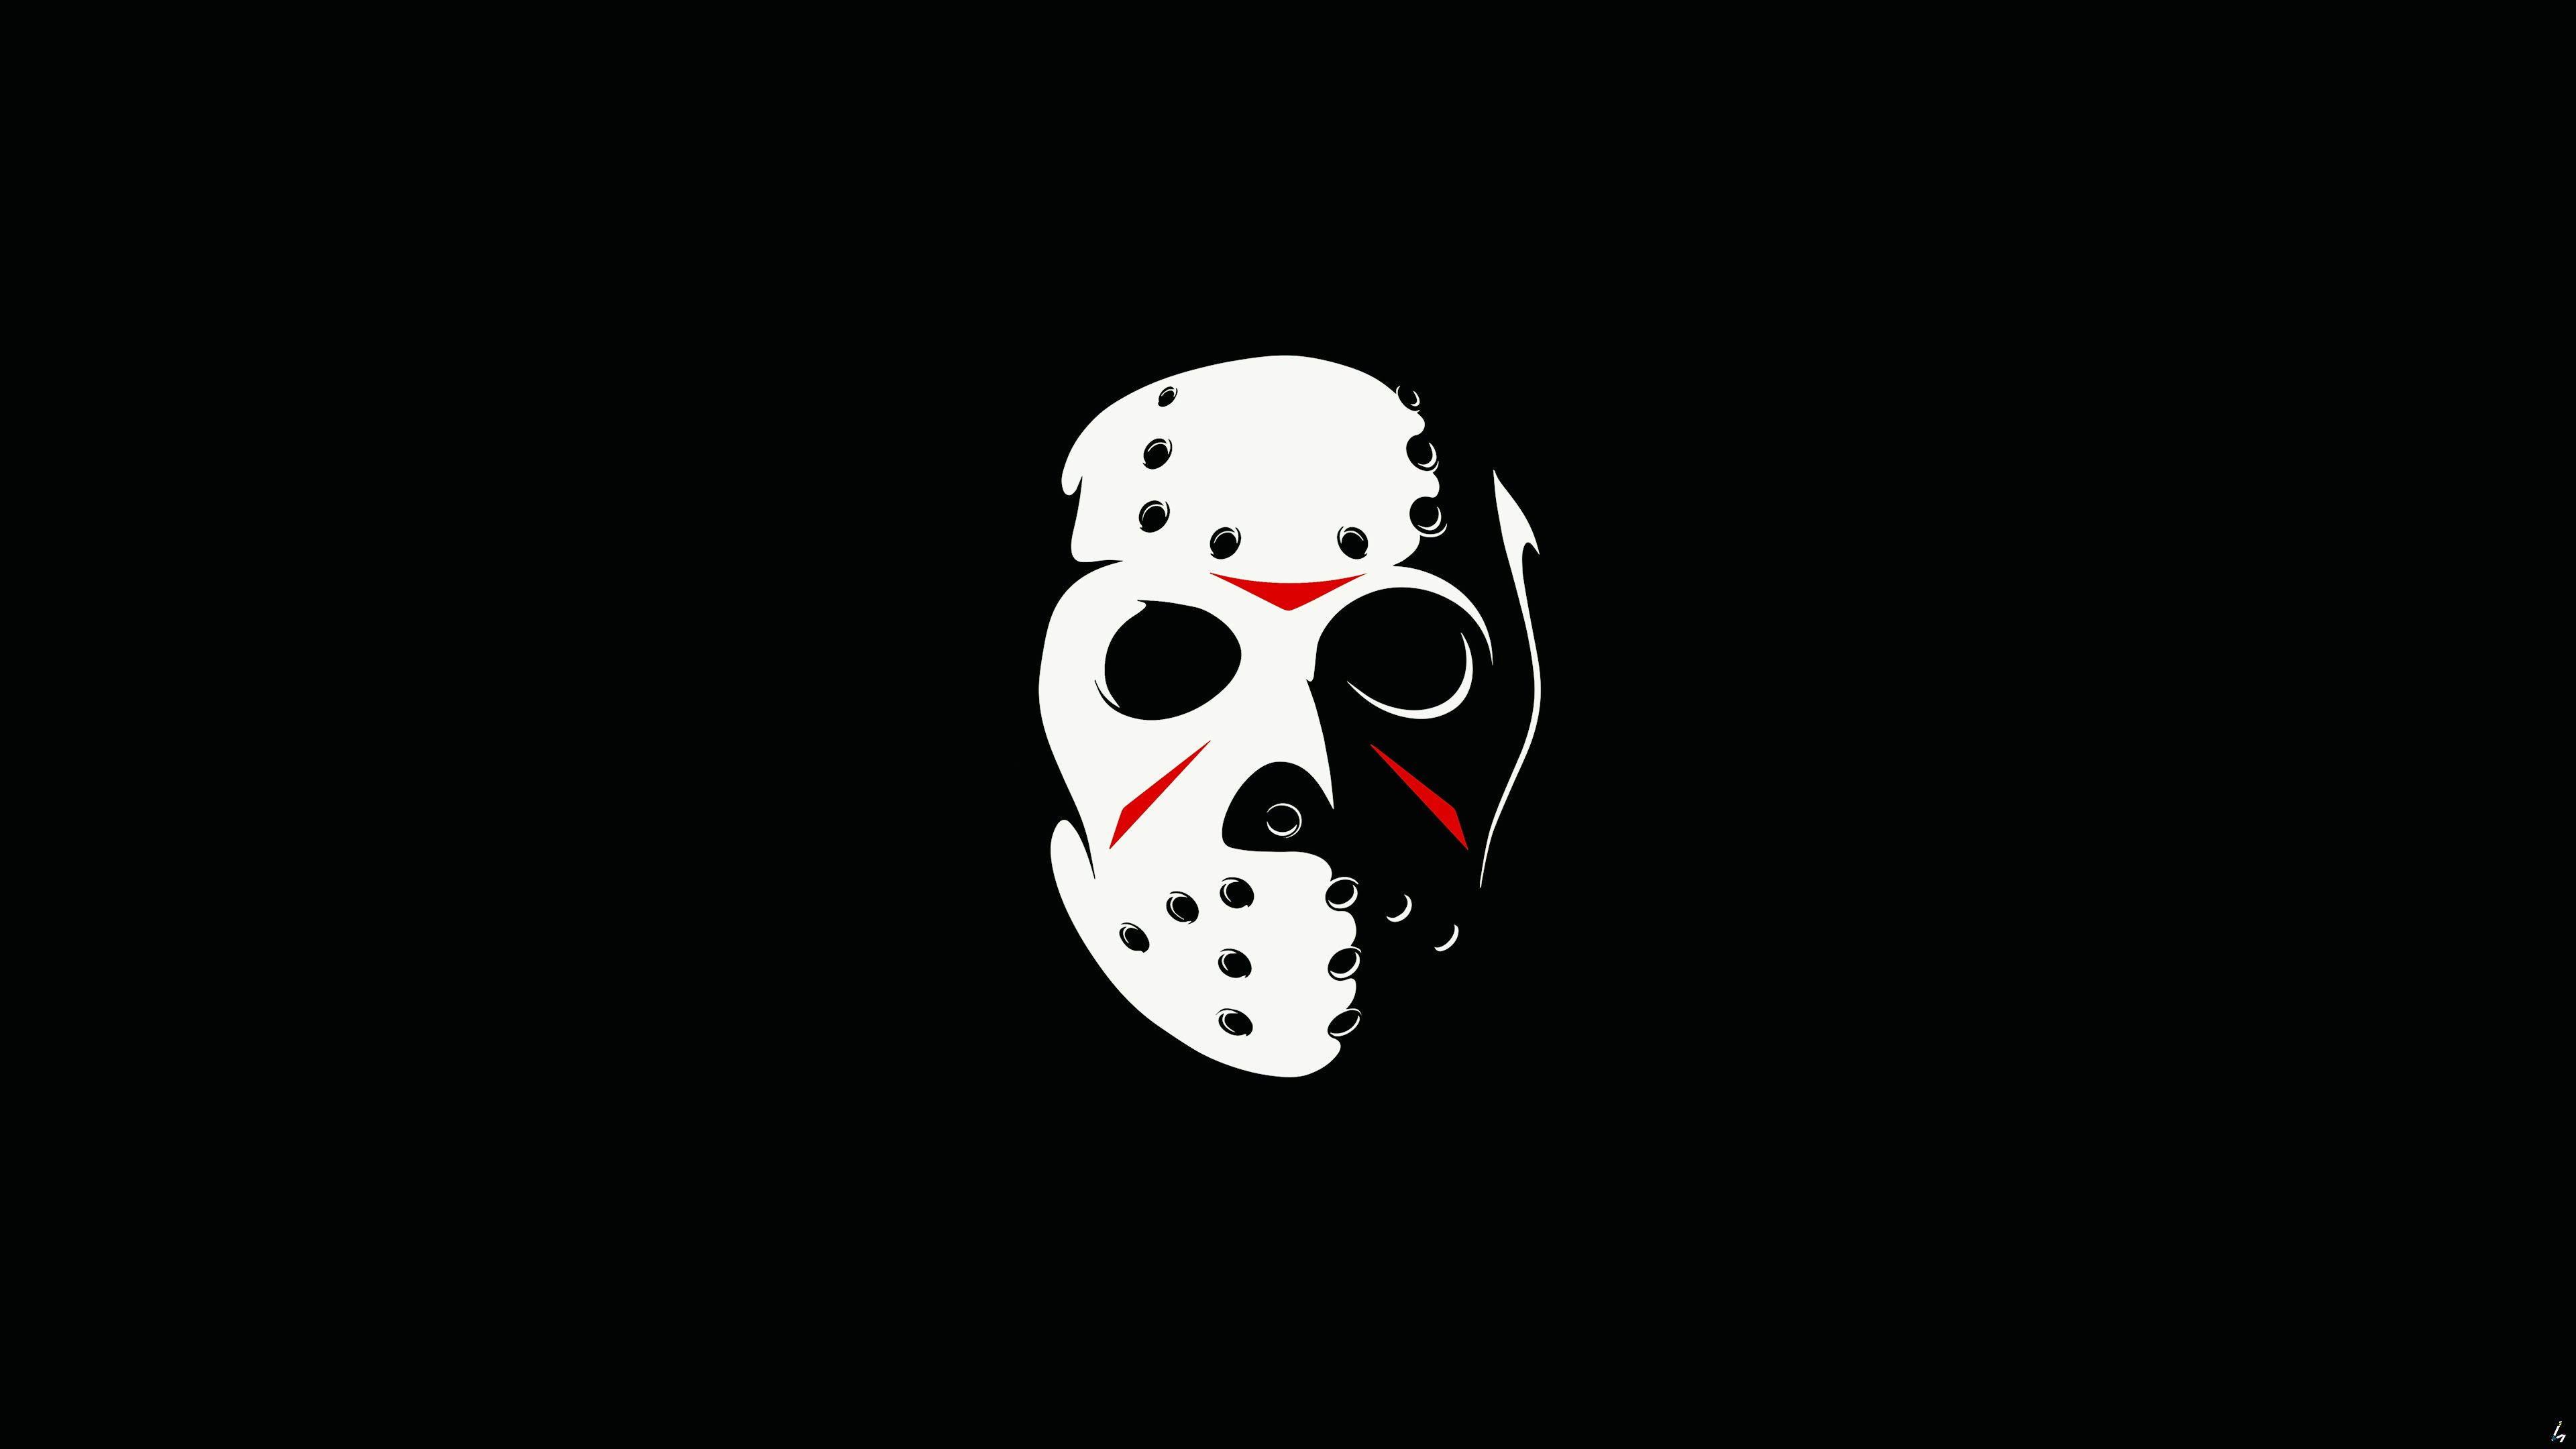 Wallpaper 4k Friday The 13th The Game Minimalism Dark 4k 2017 Games Wallpaper, 4k Wallpaper, Black Wallpaper, Dark Wallpaper, Friday The 13th The Games Wallpaper, Games Wallpaper, Hd Wallpaper